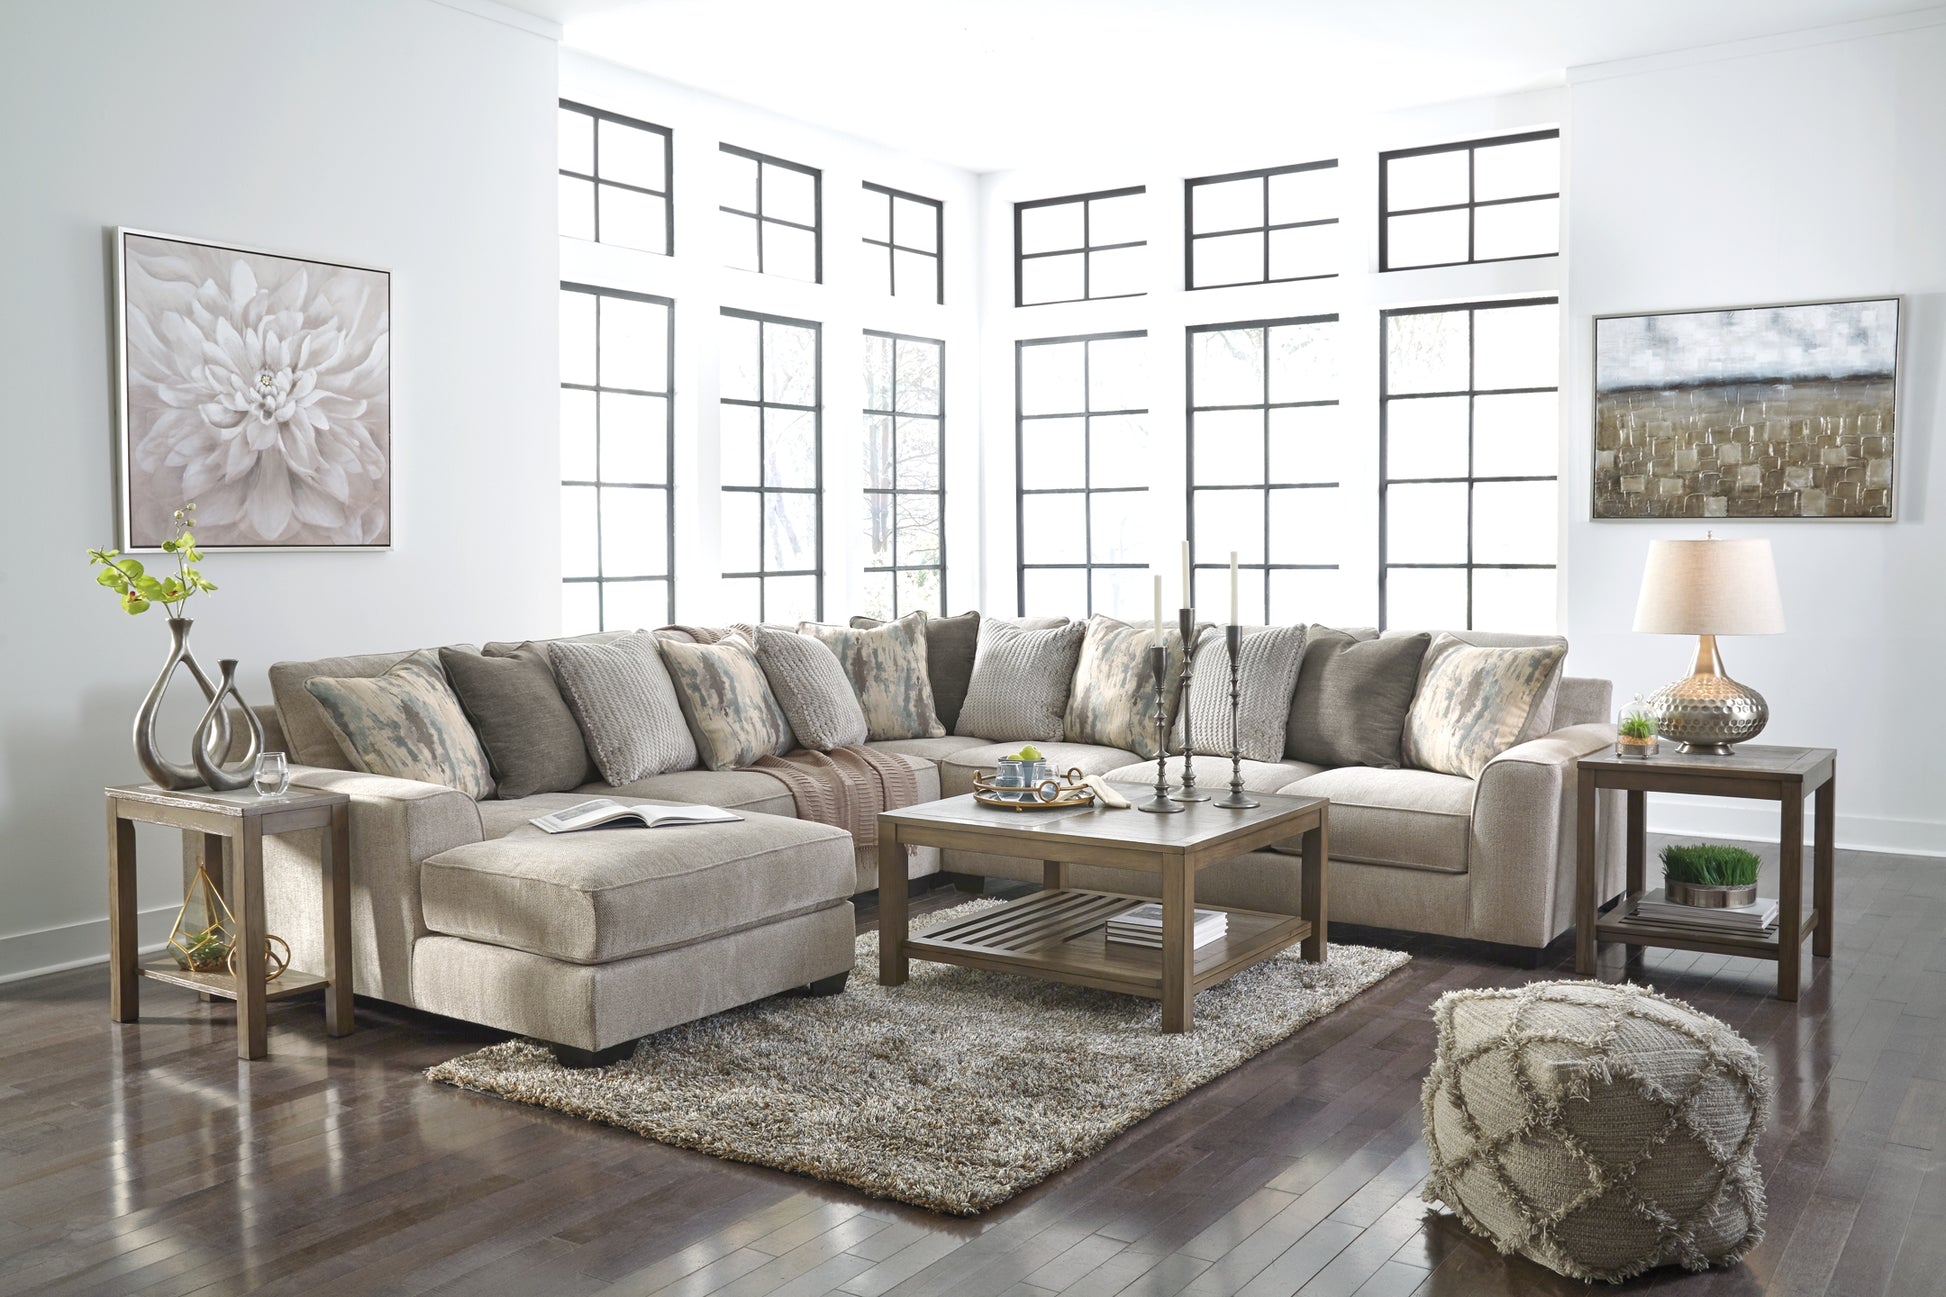 Ardsley 4-Piece Sectional with Chaise JB's Furniture  Home Furniture, Home Decor, Furniture Store